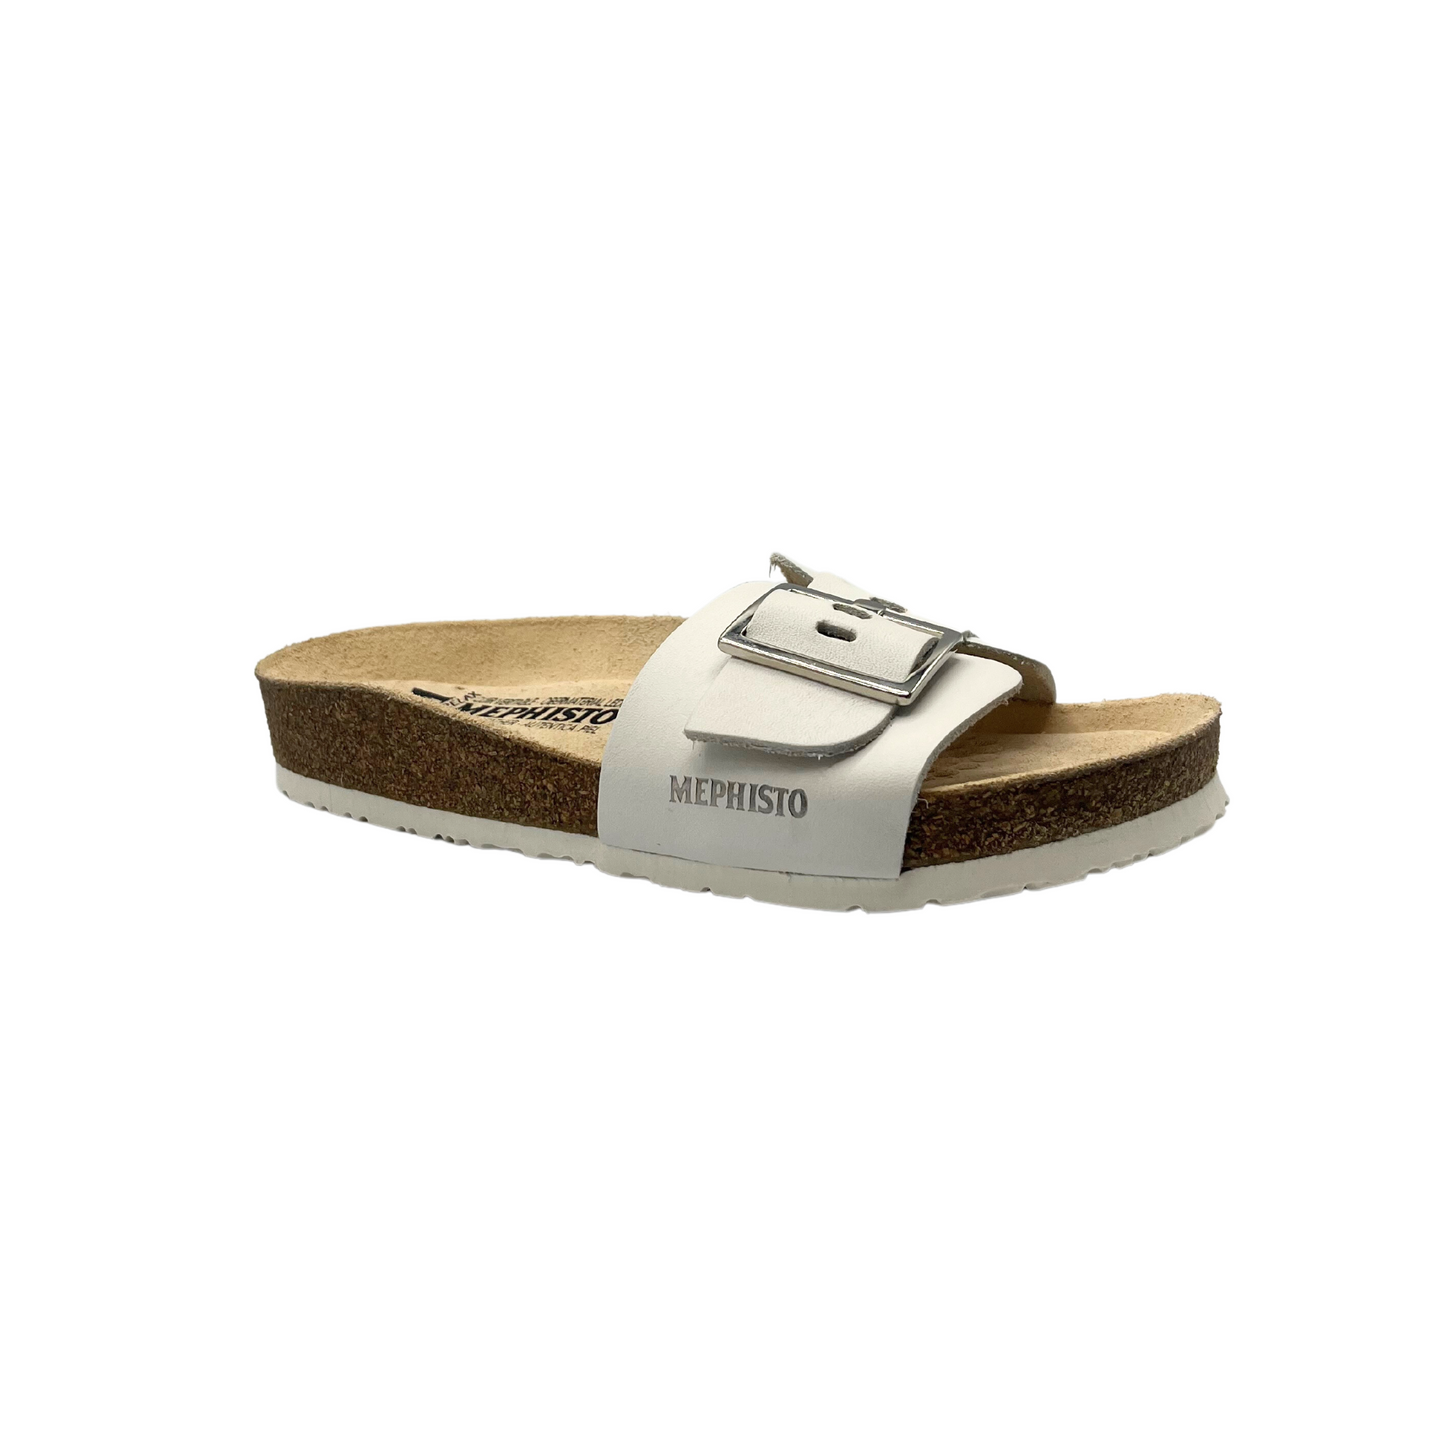 Outside view of a white mule walking sandal.  One wide leather panel at forefoot with adjustable silver buckle.  Ergonomic leather/cork footbed